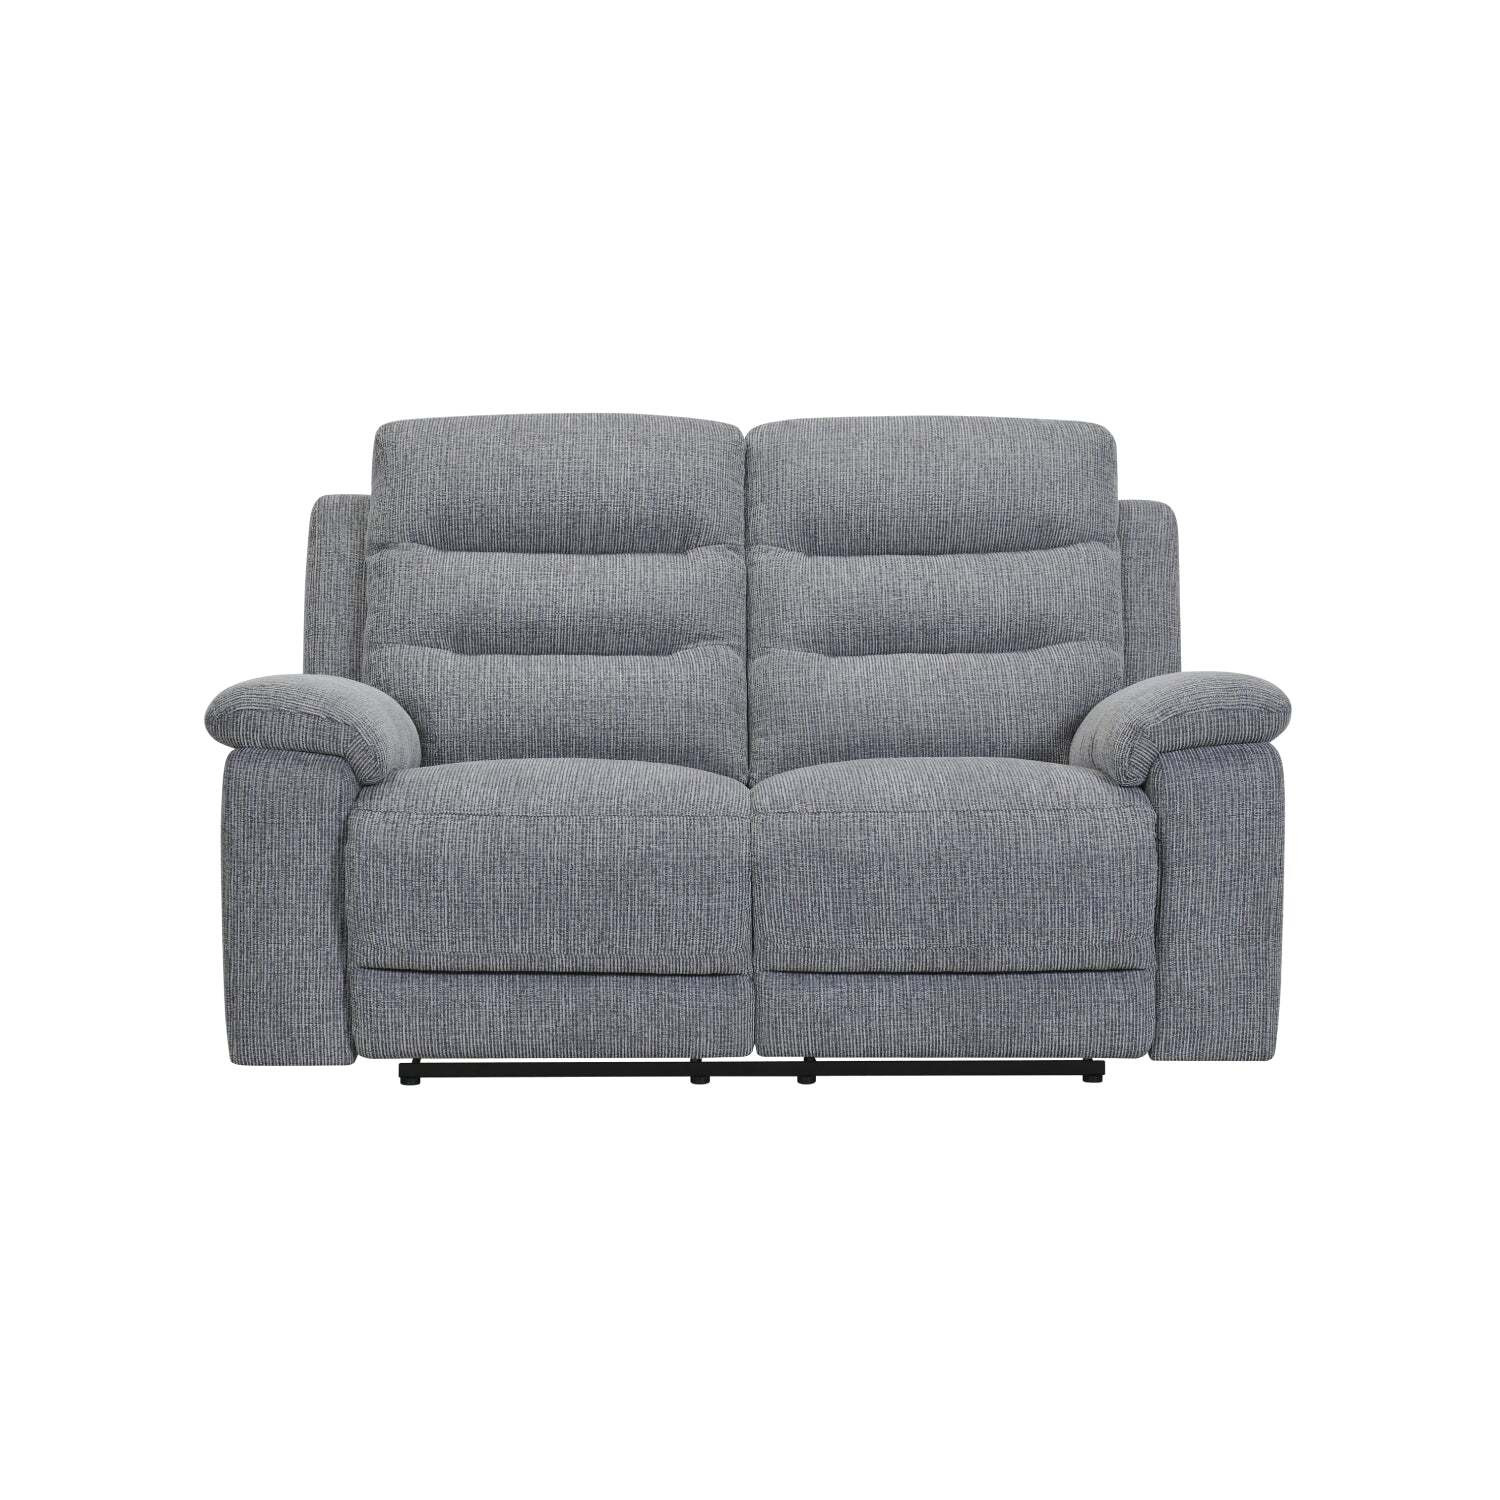 Ashby 2 Seater Fabric Reclining Sofa - Forest F20 TX2580 / Manual Reclining